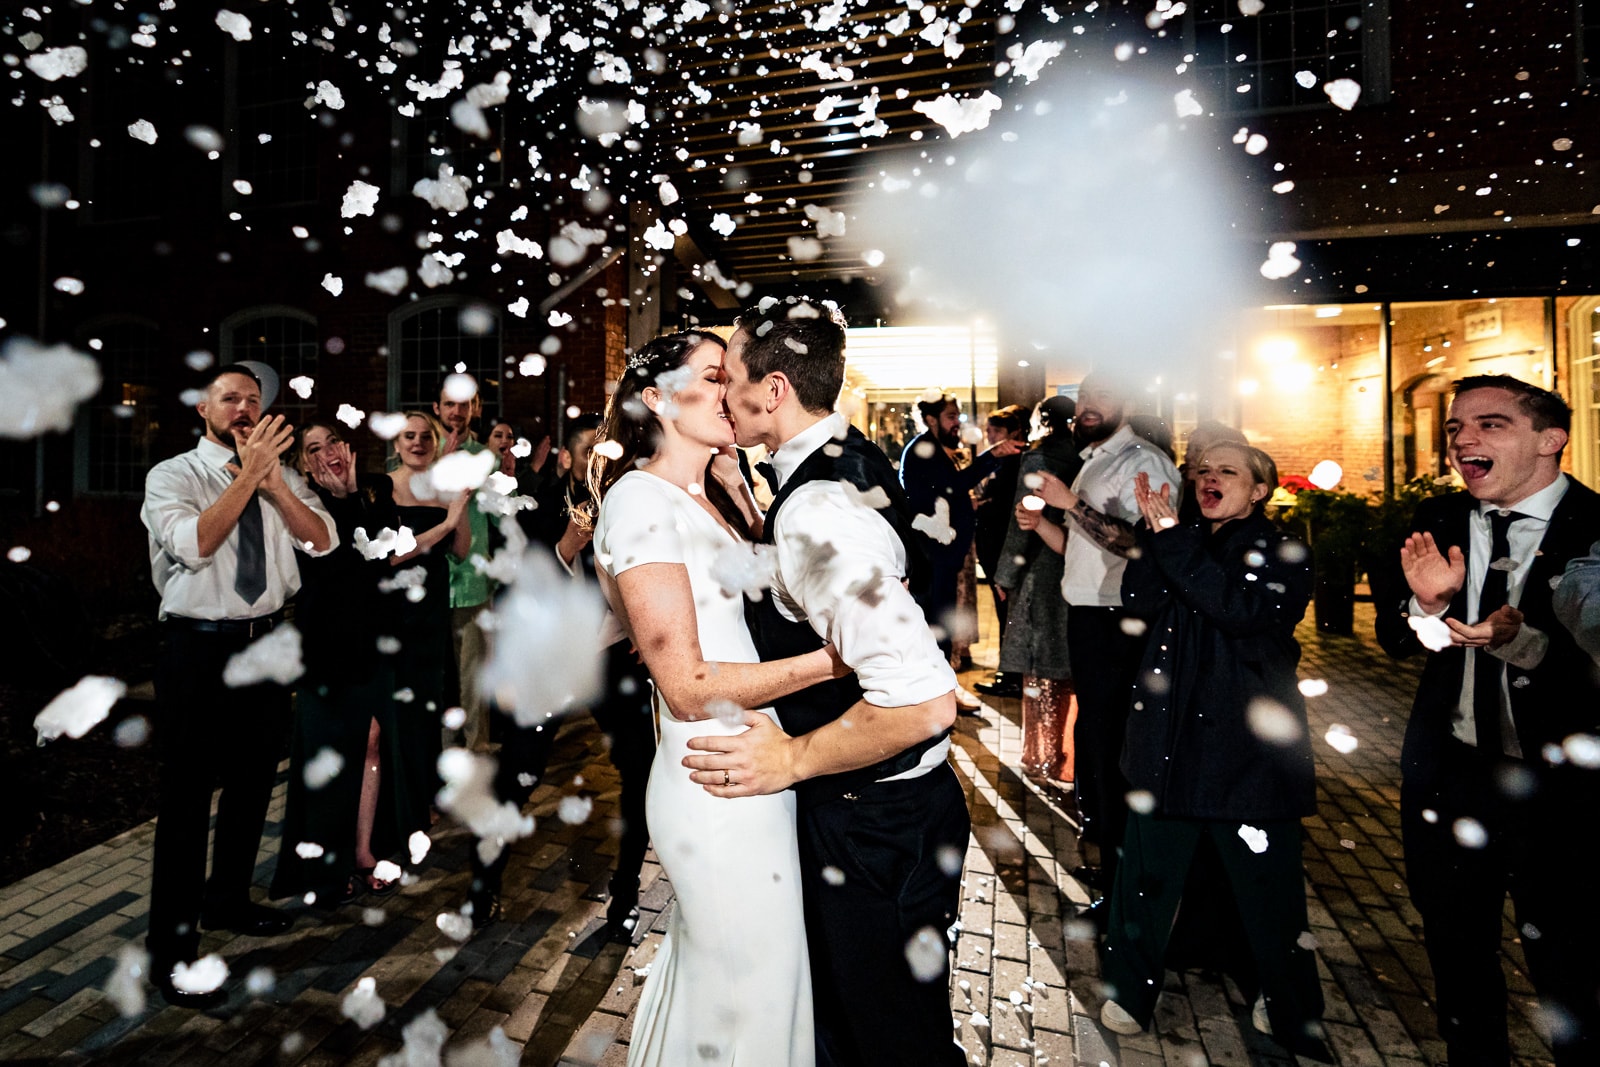 Want a winter wedding vibe, but live in the south? get a snow machine for your exit! | photo by Kivus & Camera